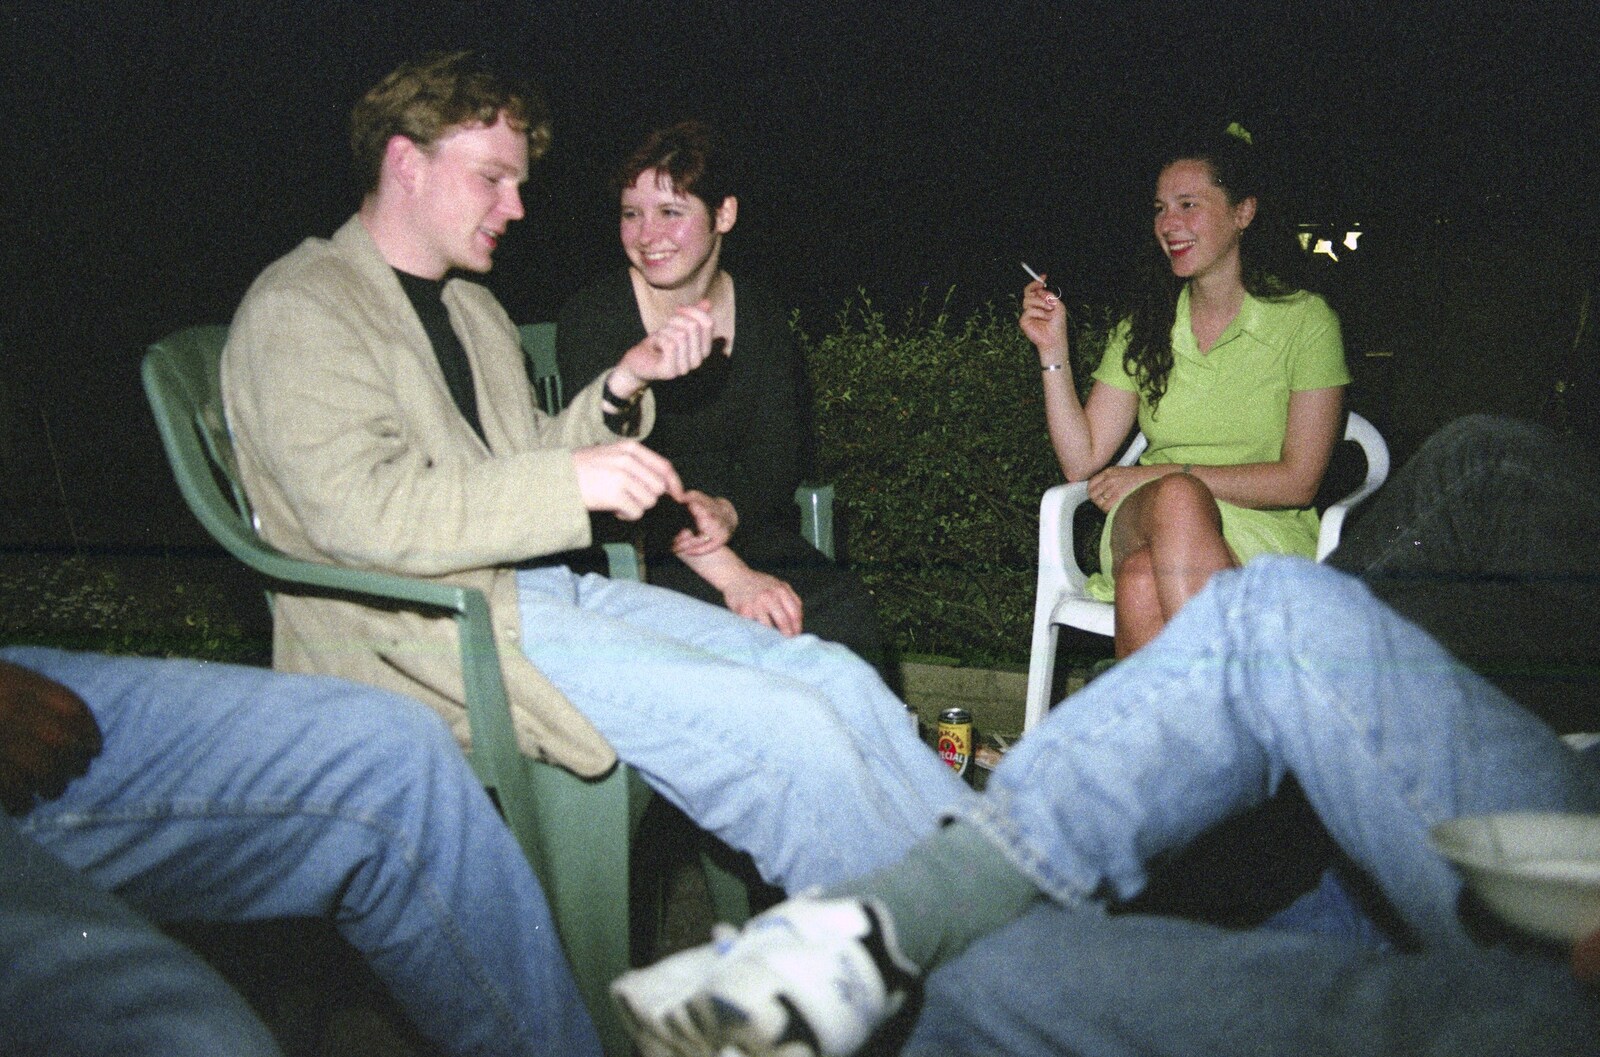 Joe and Lisa chat from Andrew's CISU Party, and Nosher's Garden Barbeque, Ipswich and Brome, Suffolk - June 10th 1998